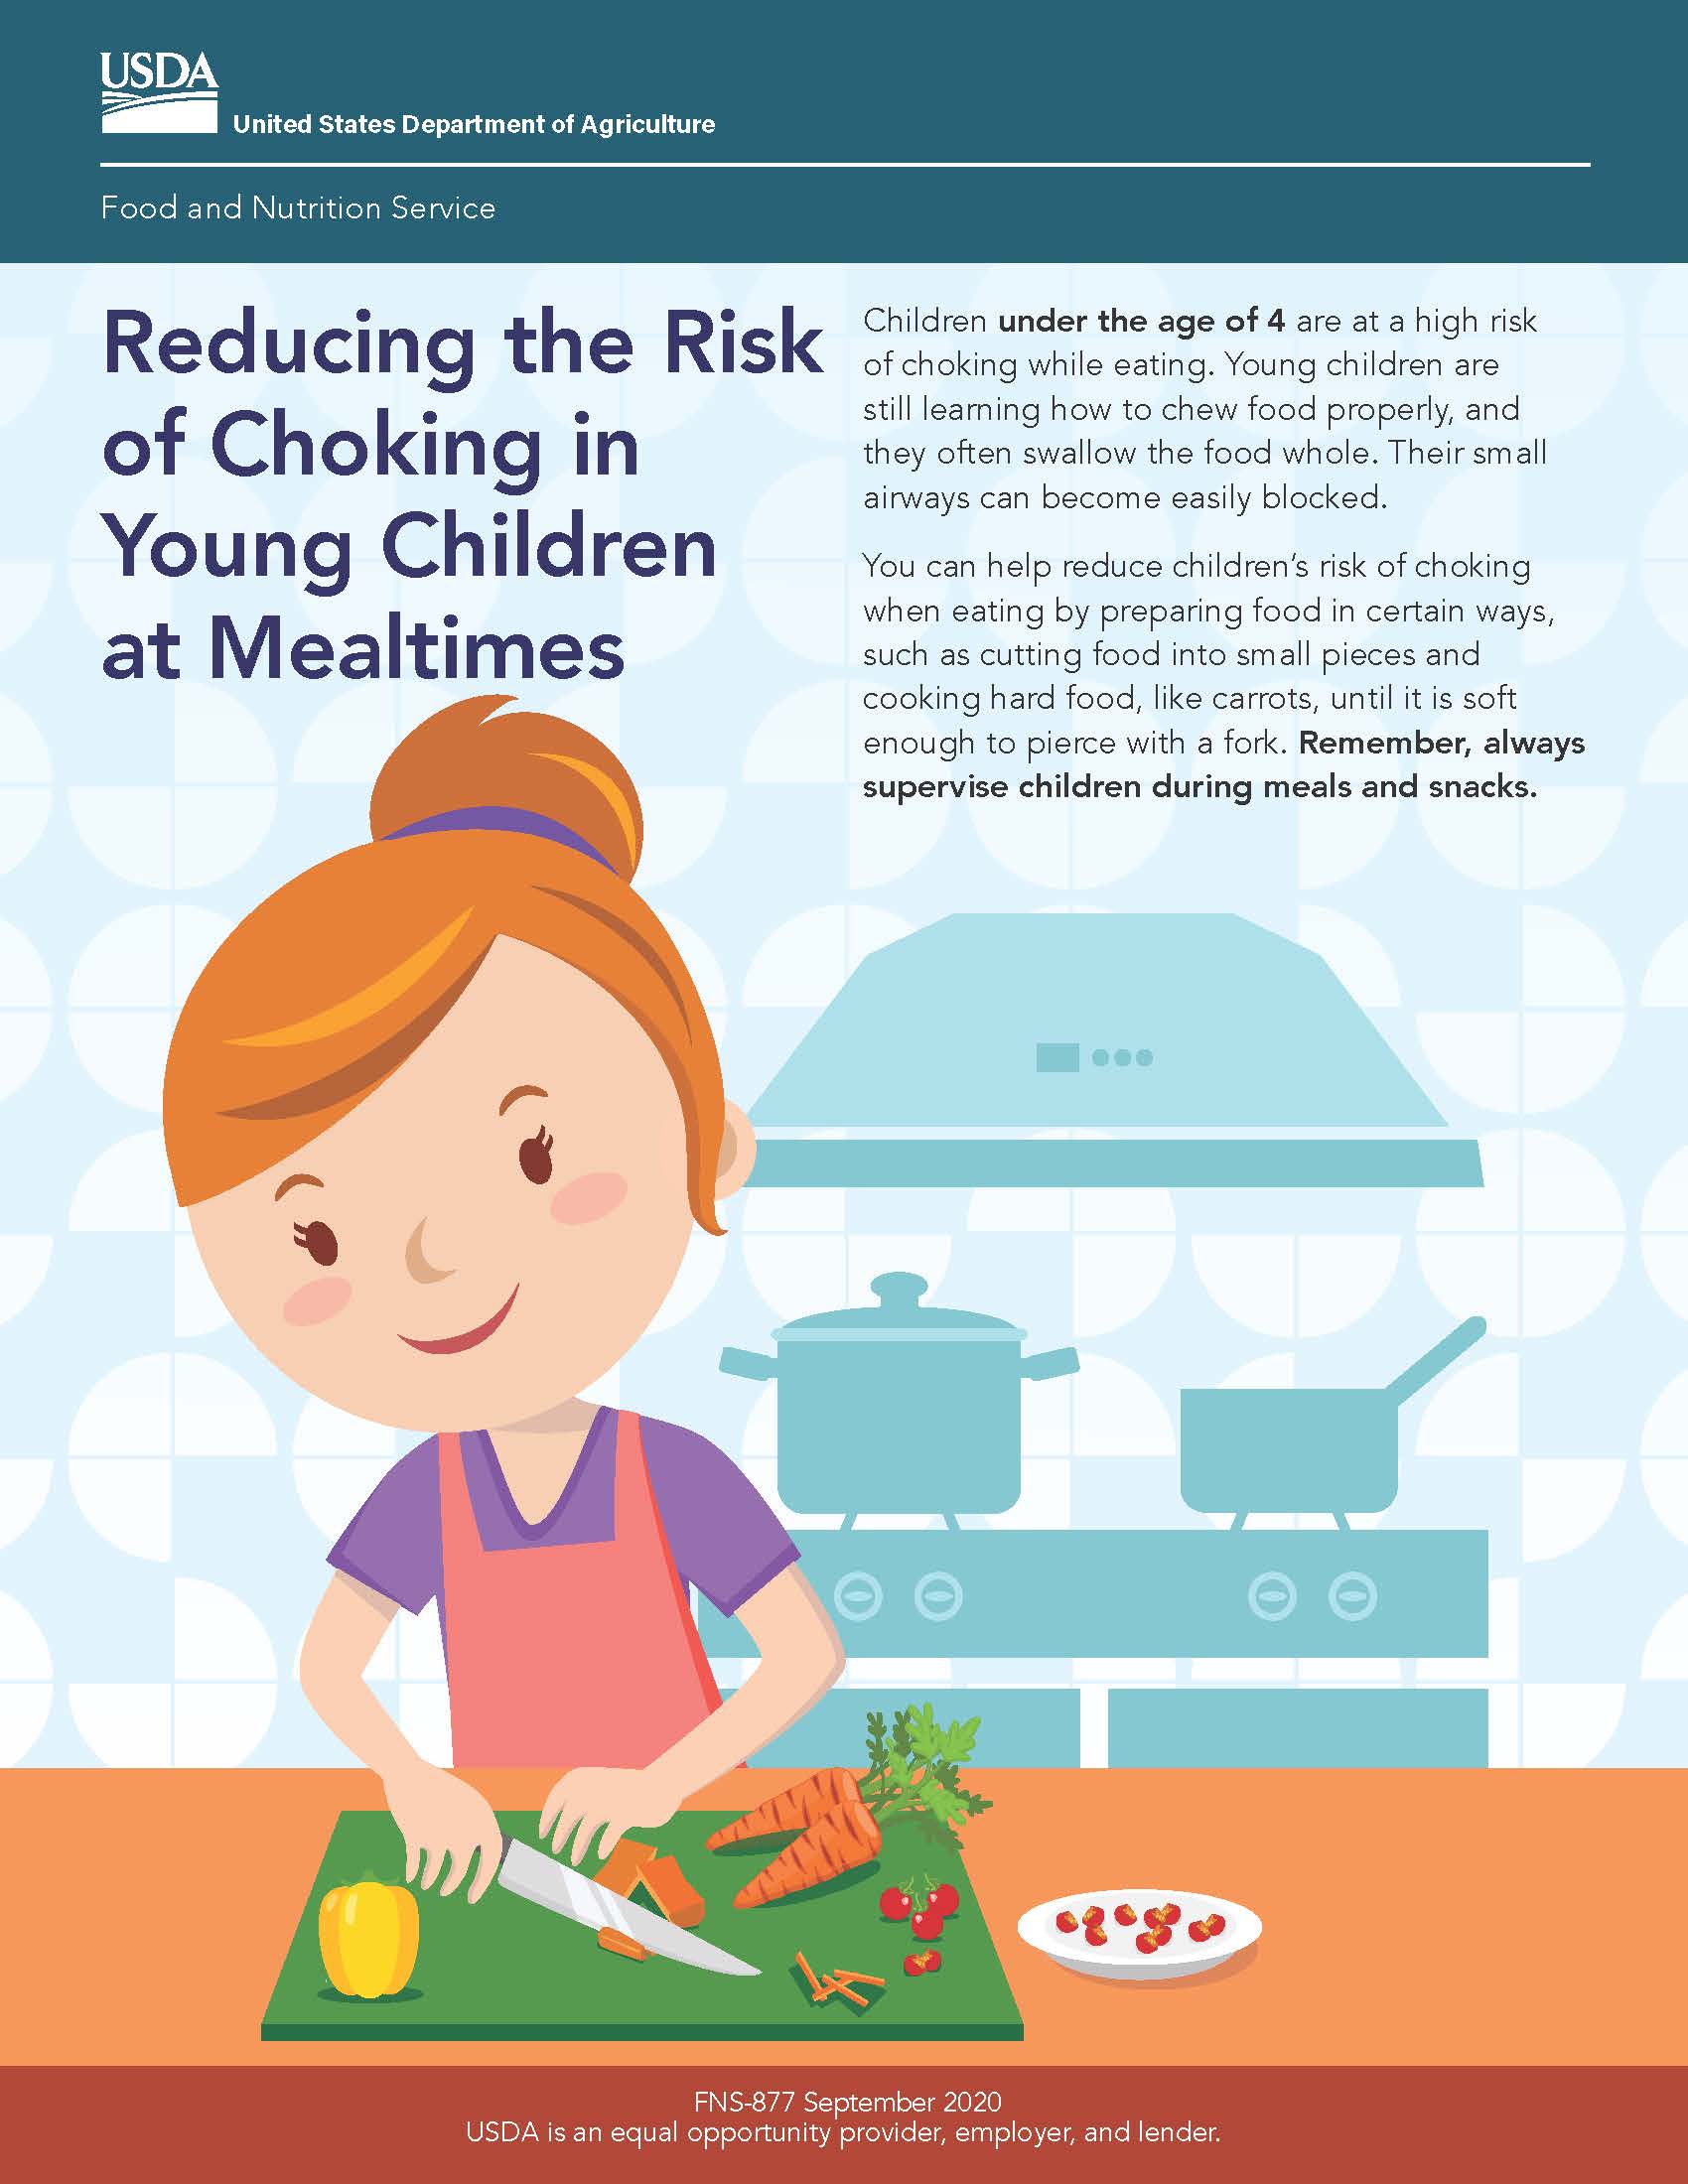 Reducing the Risk of Choking in Young Children at Mealtimes